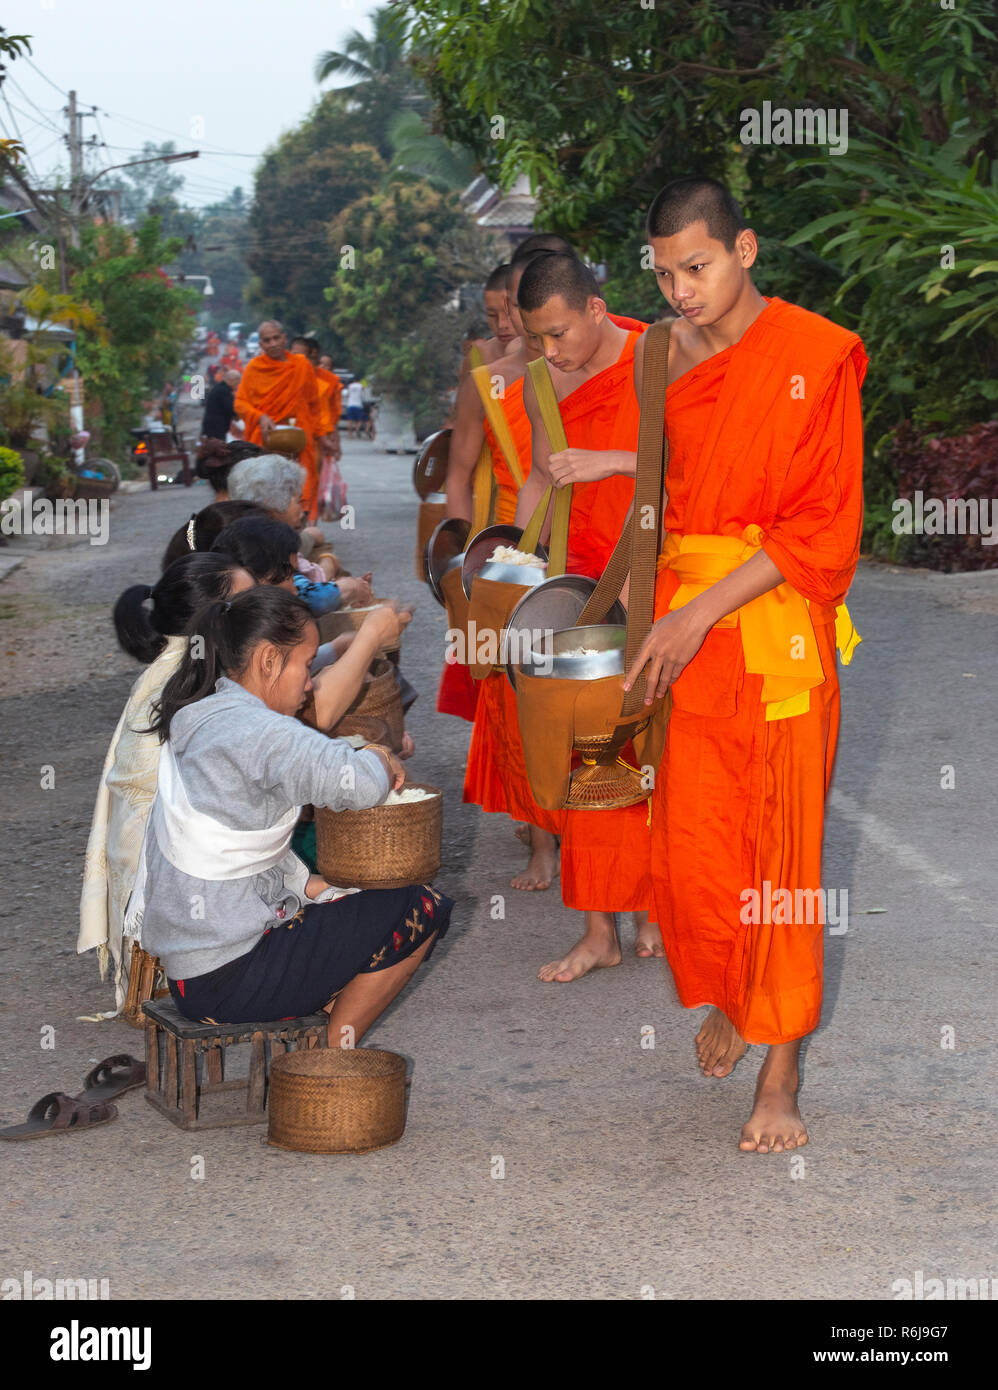 Monks in saffron robes take alms at dawn from local people in the town of Luang Prabang, Laos, South East Asia Stock Photo